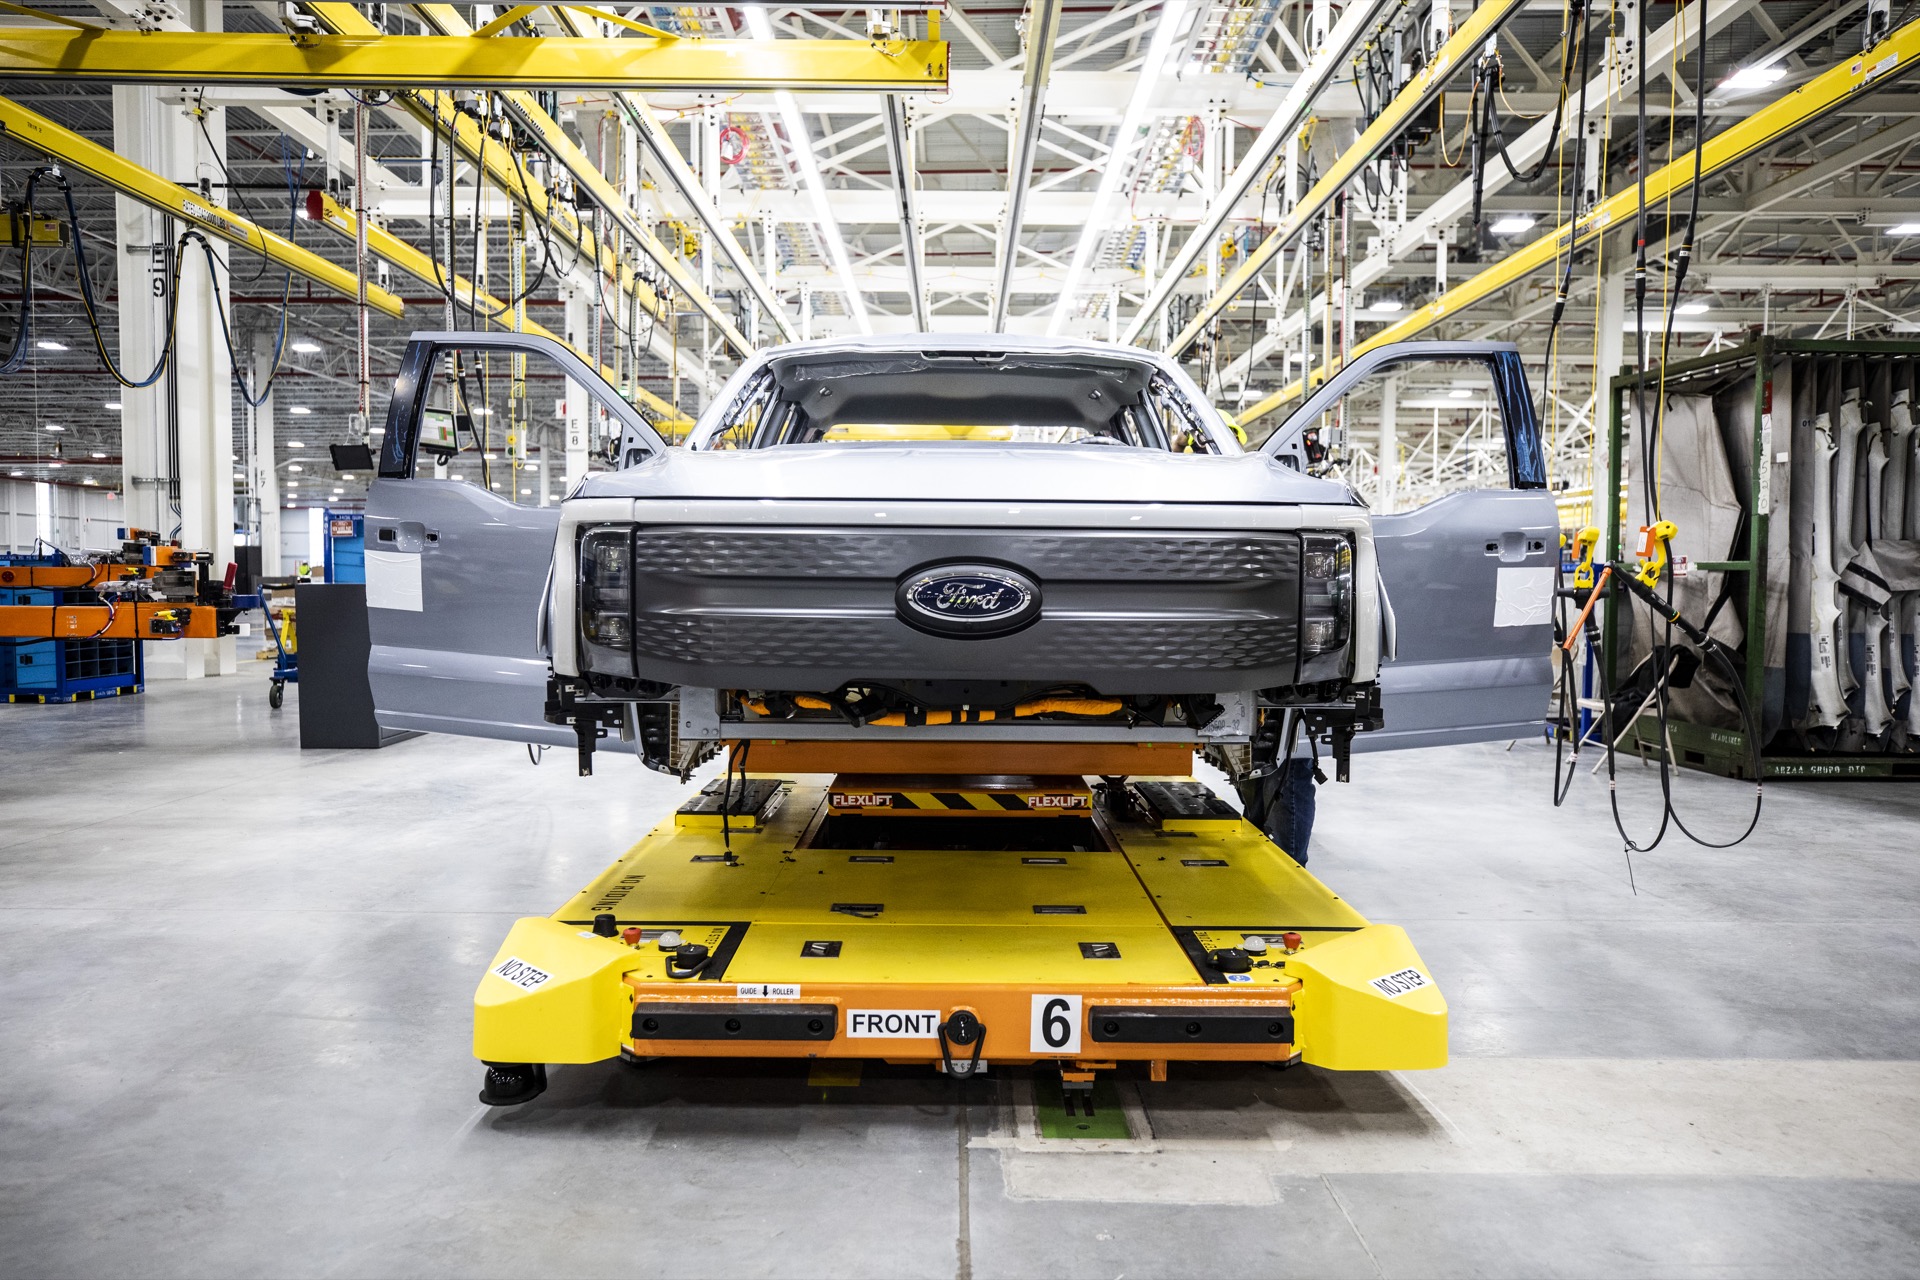 Ford F-150 Lightning electric trucks already produced, first deliveries still due for spring 2022Ford F-150 Lightning electric trucks already produced, first deliveries still due for spring 2022